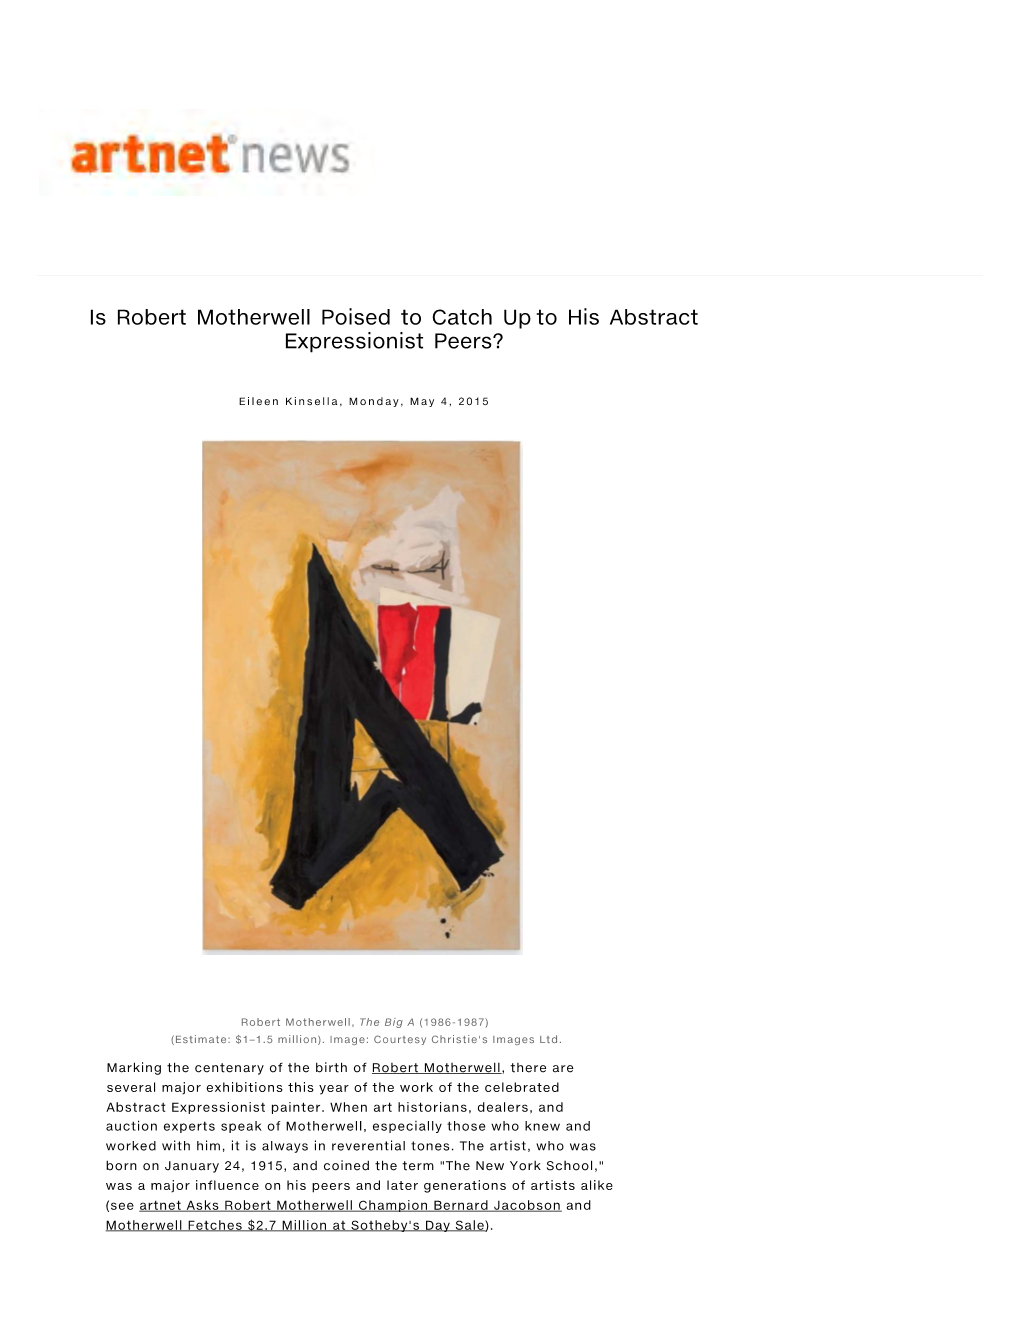 Is Robert Motherwell Poised to Catch up to His Abstract Expressionist Peers?